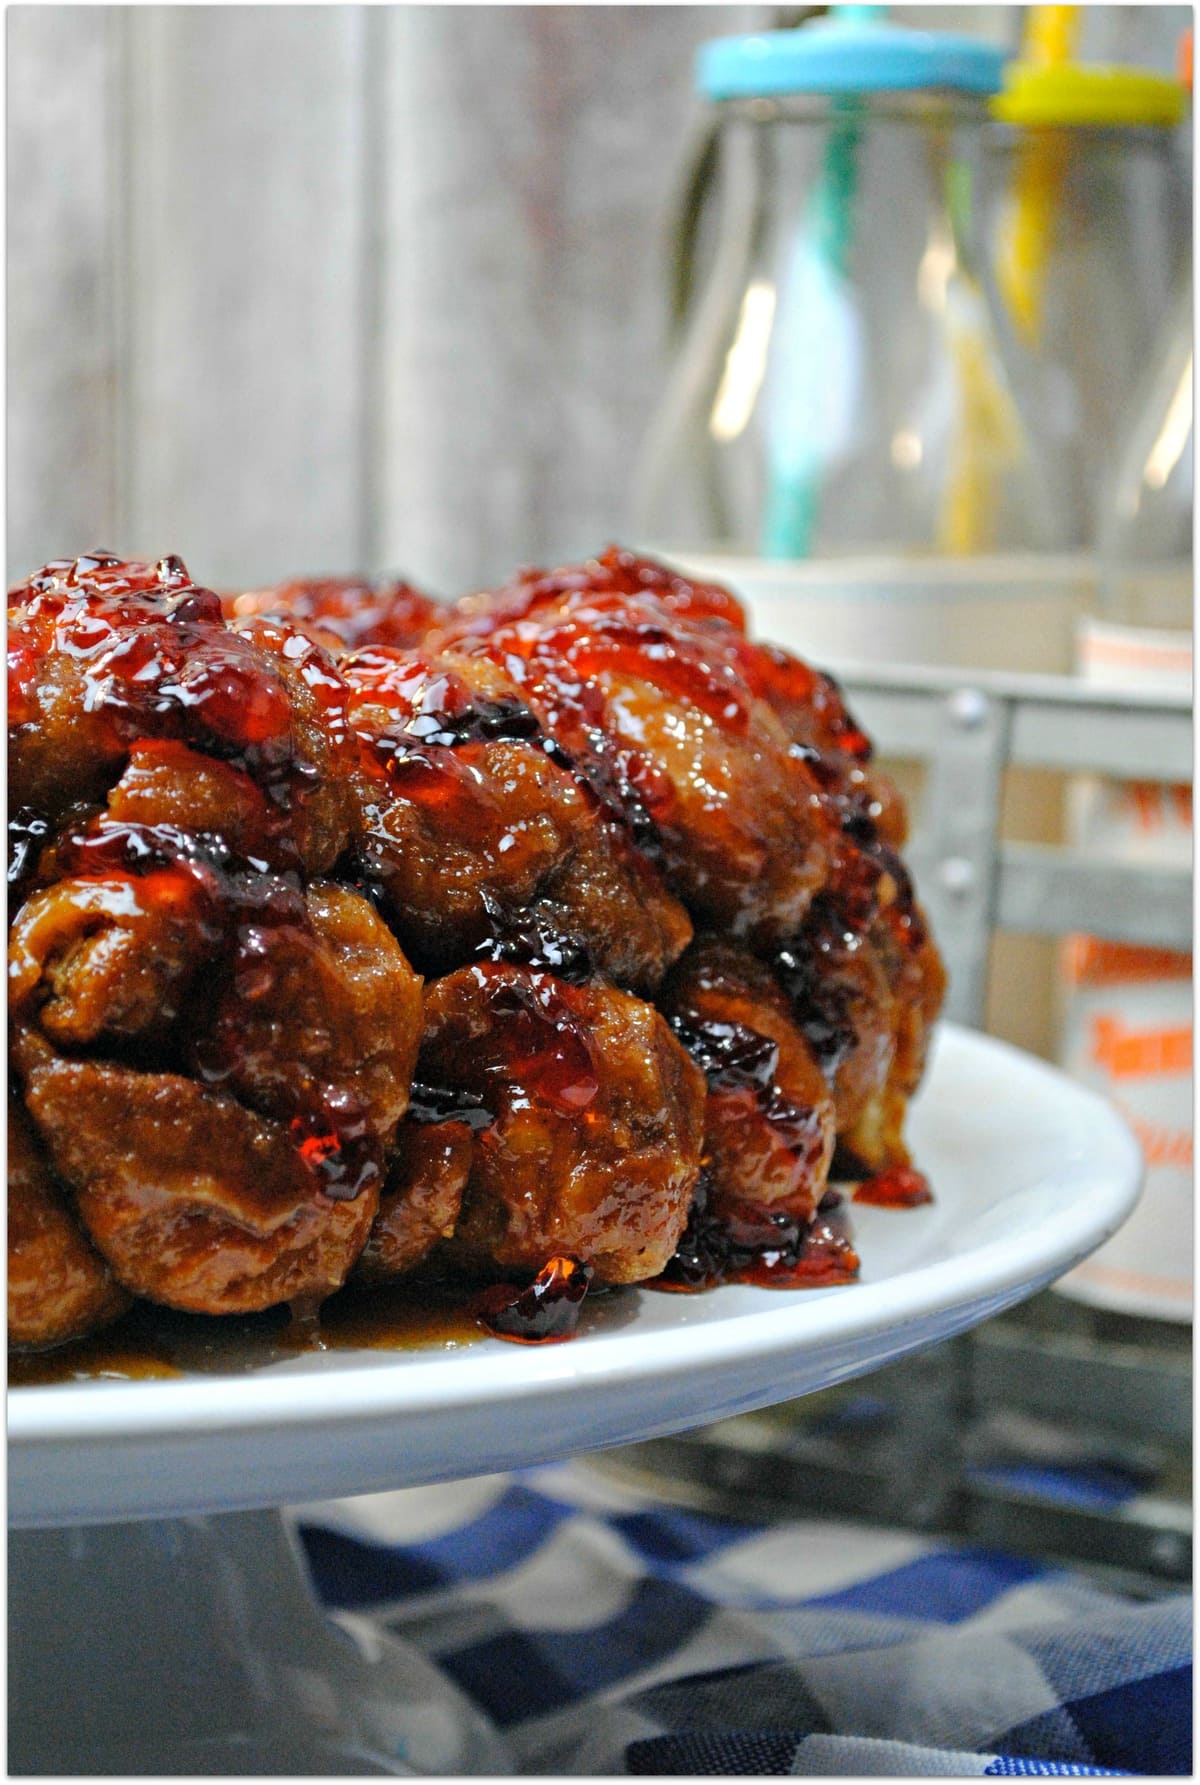 Peanut Butter and Jelly Monkey Bread